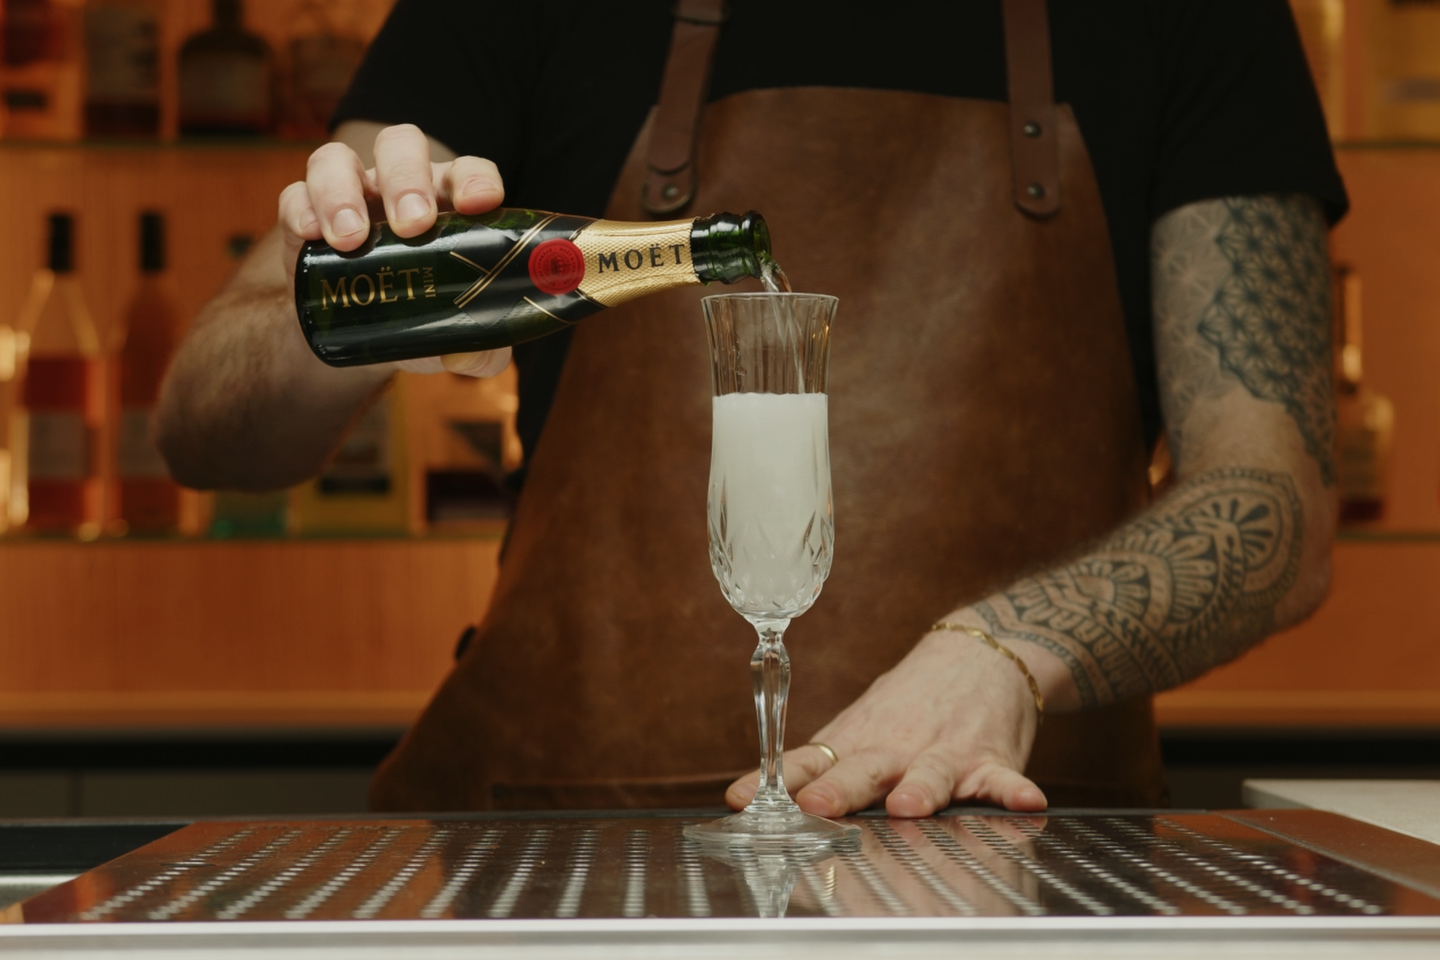 <p>Top the cocktail with champagne (more or less 2 oz, depending on the glass you’re using). The champagne adds a bubbly, festive element to the French 75, making it perfect for celebrations.</p>
